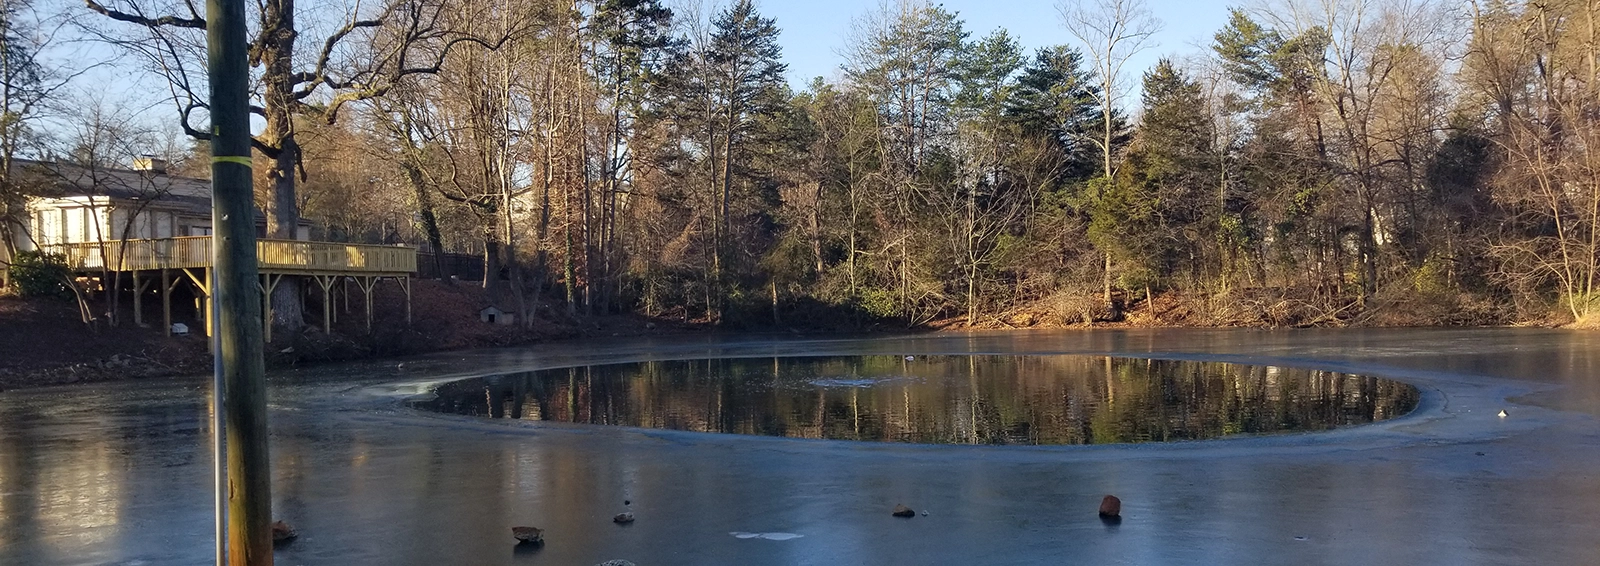 Iced over pond, can lead to winter fish kill